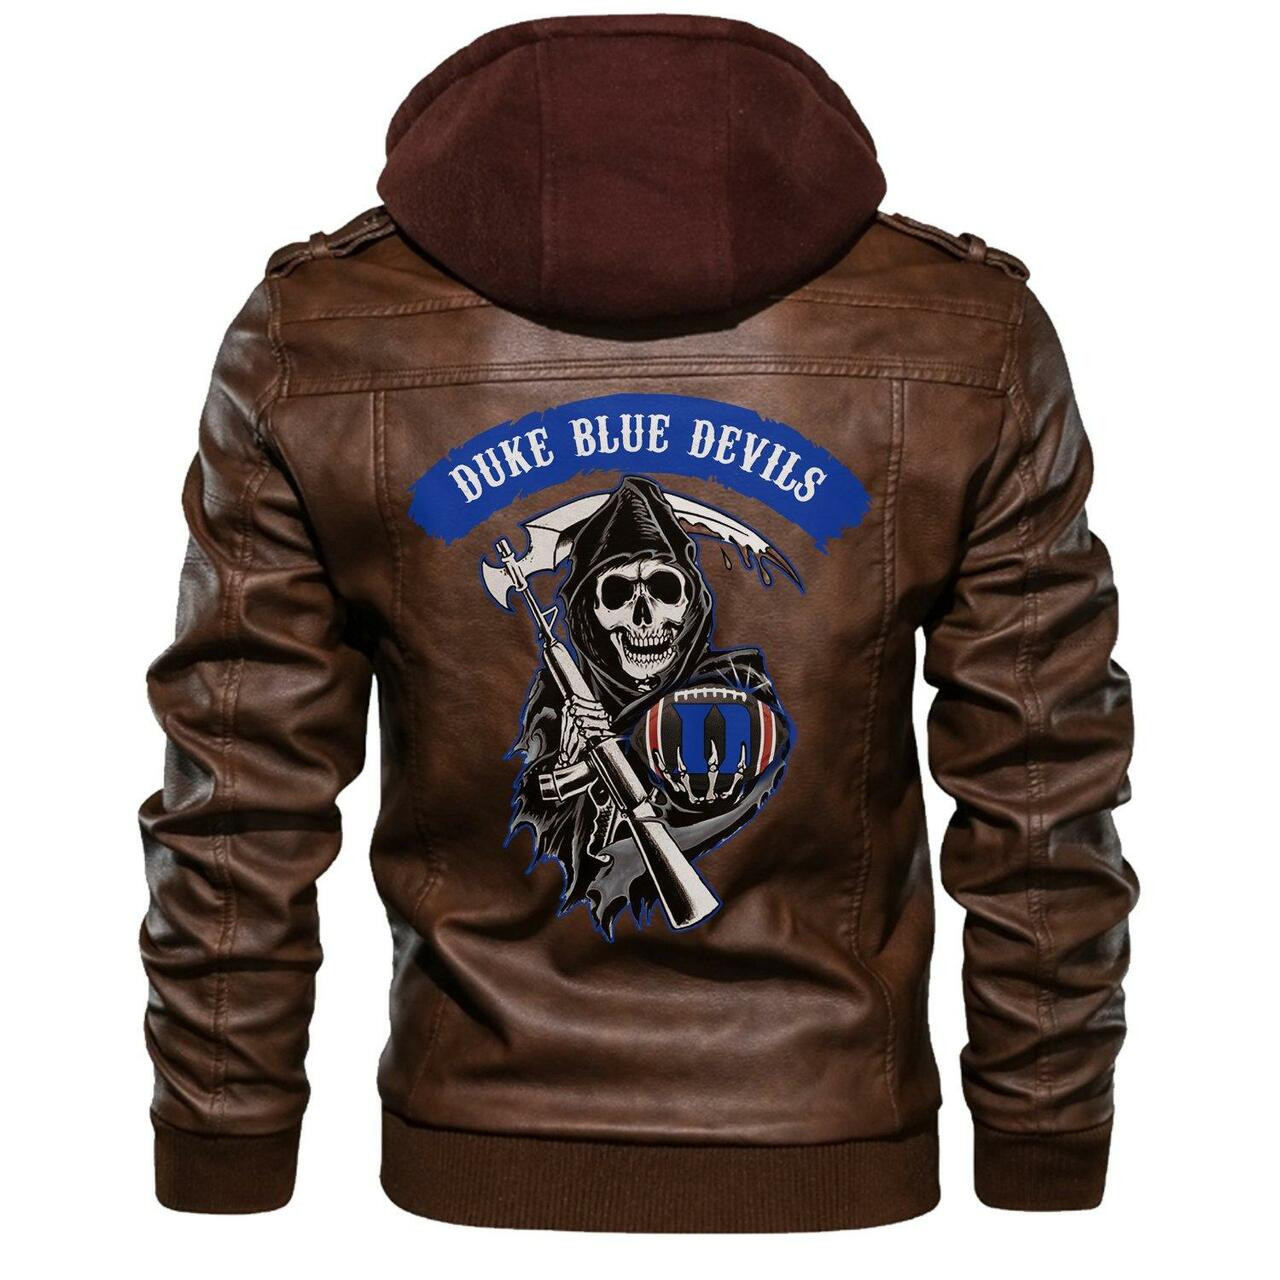 Check out and find the right leather jacket below 21